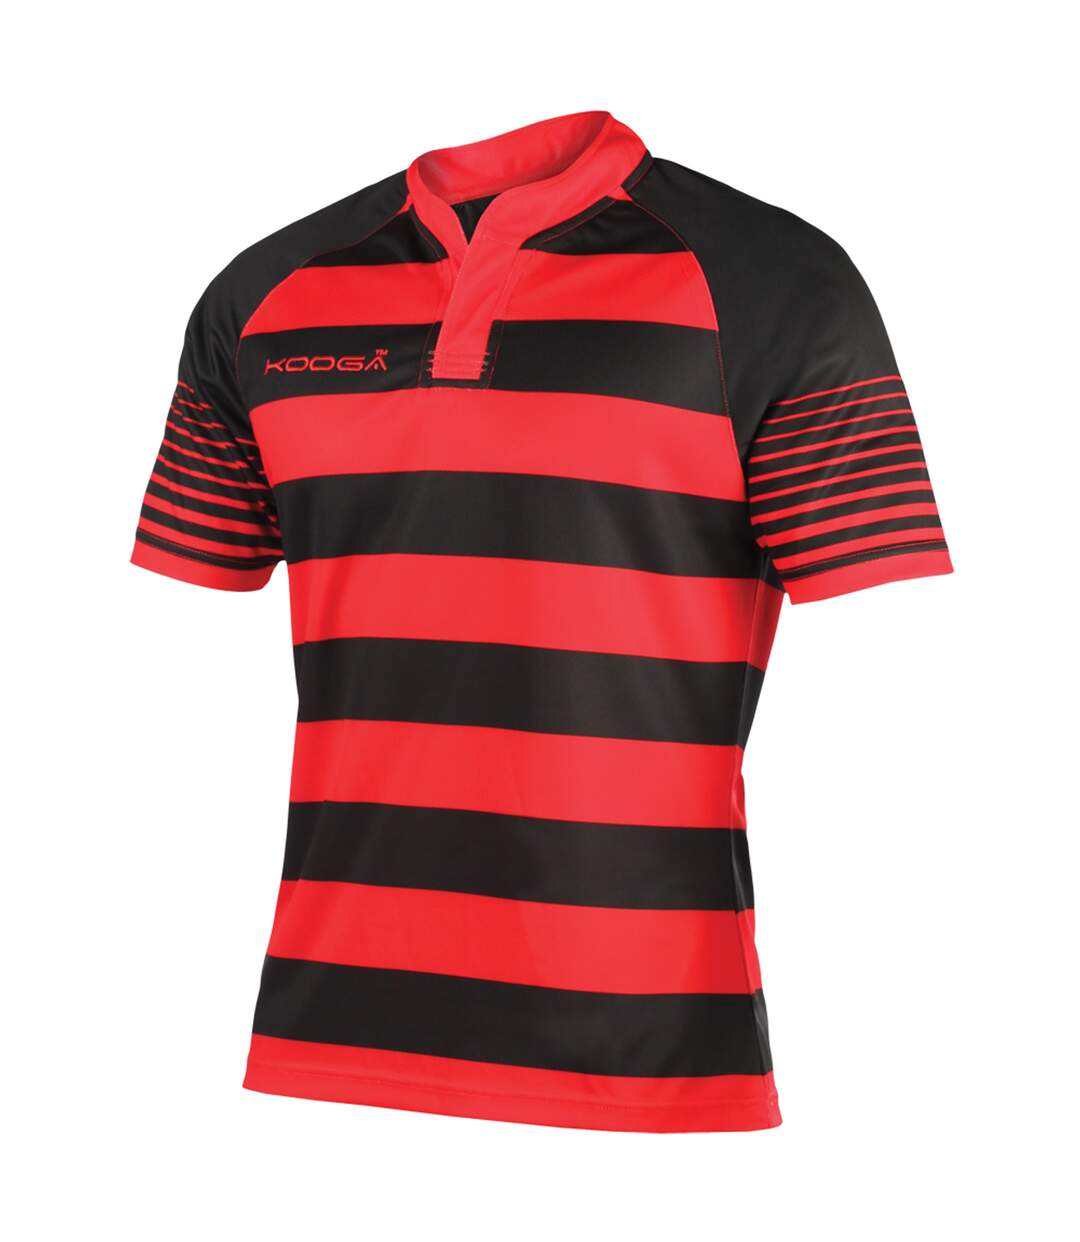 KooGa Mens Touchline Hooped Match Rugby Shirt (Black/Red)